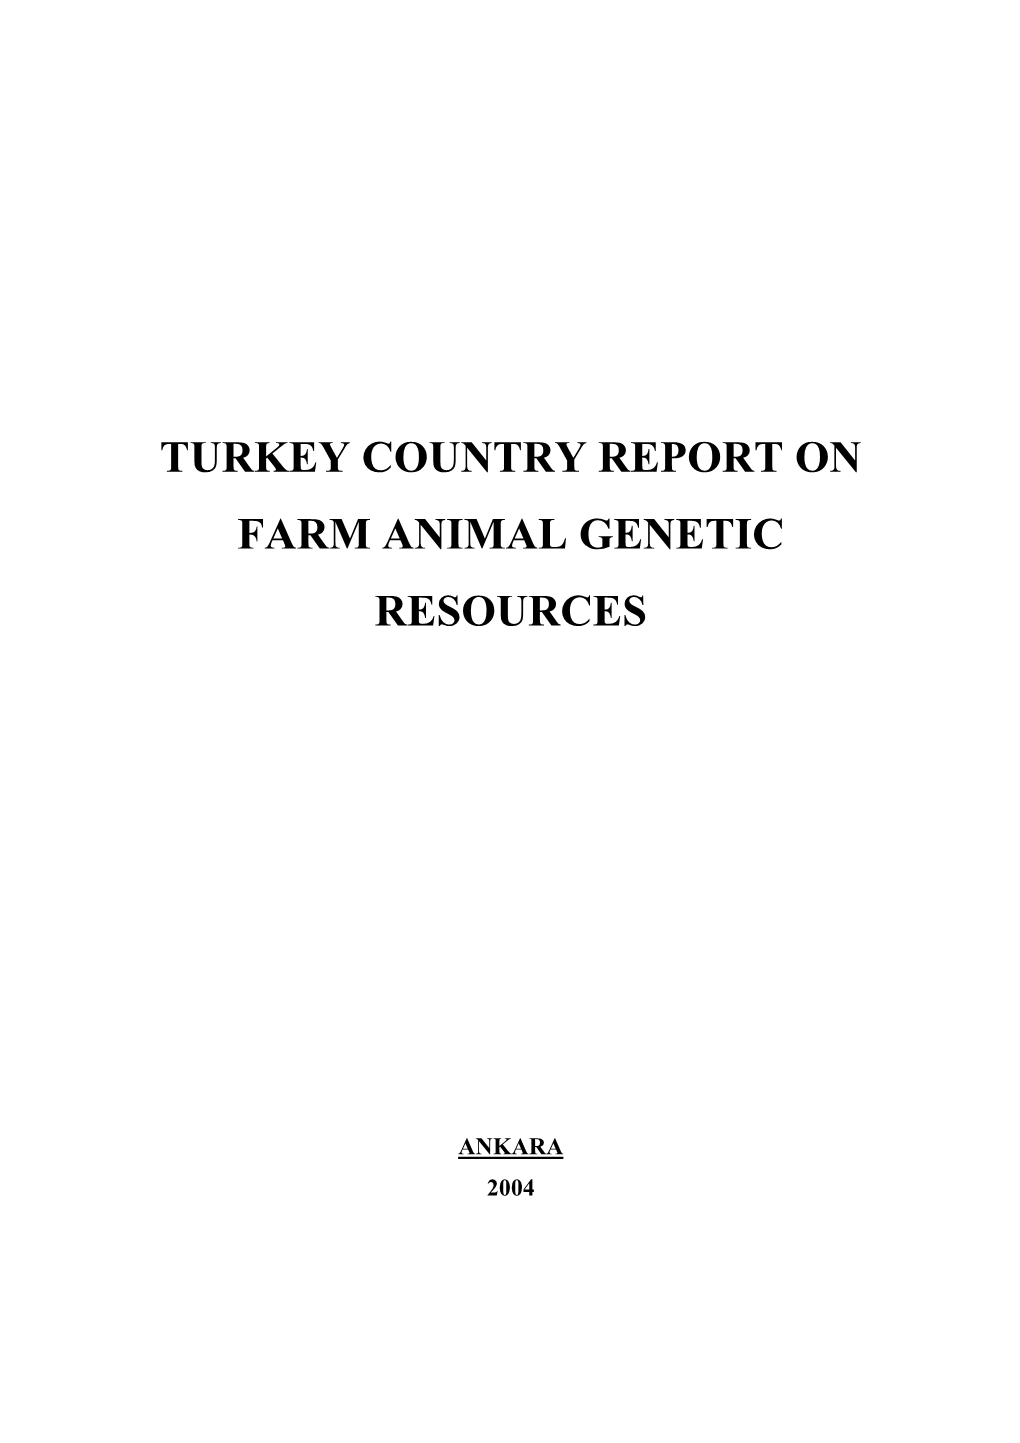 Turkey Country Report on Farm Animal Genetic Resources